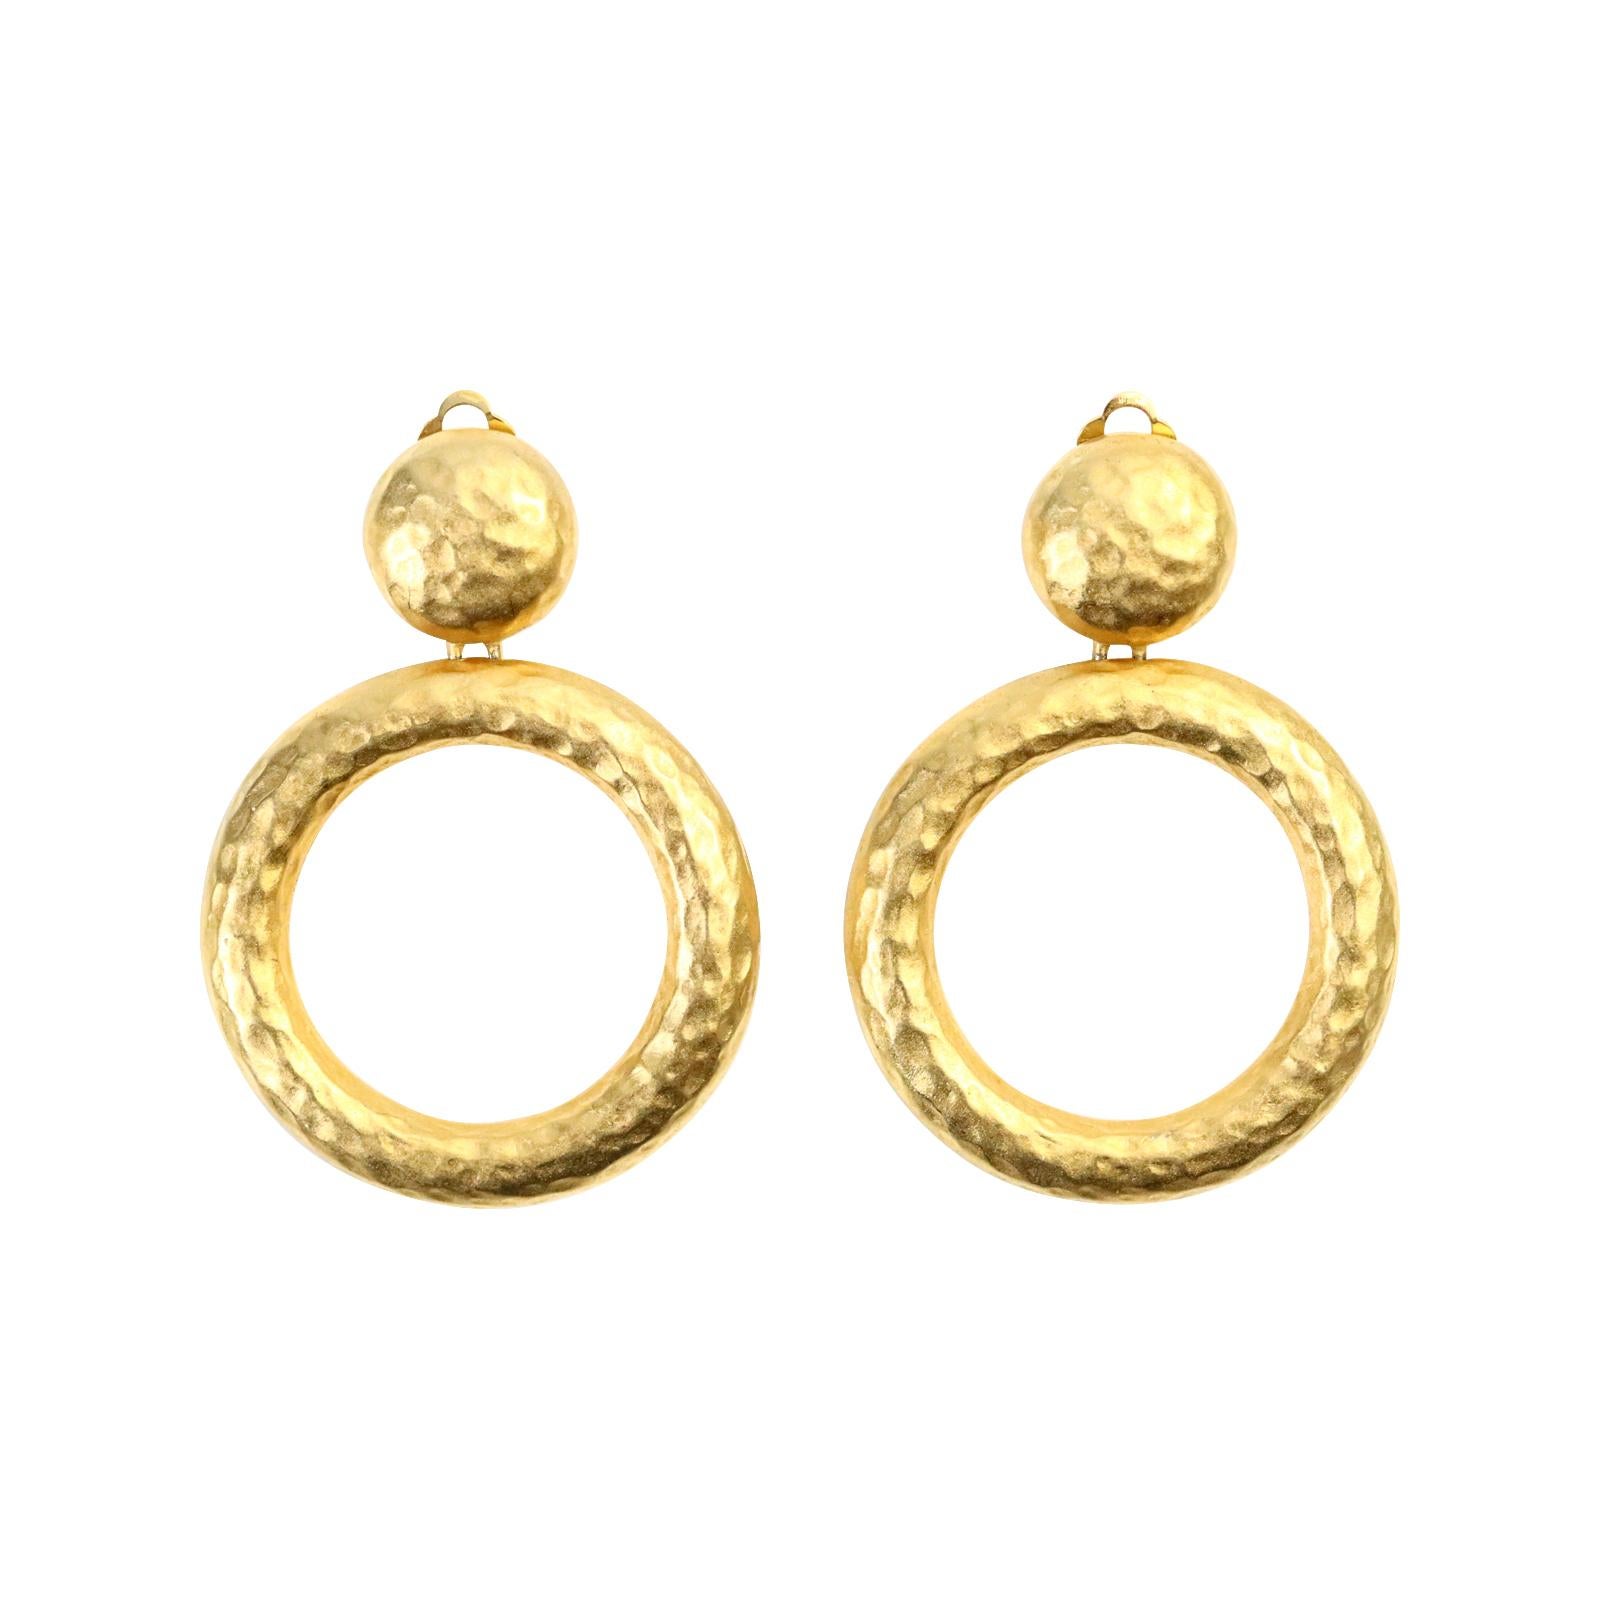 Vintage EP Matte Gold Hammered Hoops Circa 1980s.  The hoops are front facing and dangle from the round piece so always moving forward. These hoops will always be in style. So chic. Clip On.  You don't know you need these until you have them. I have